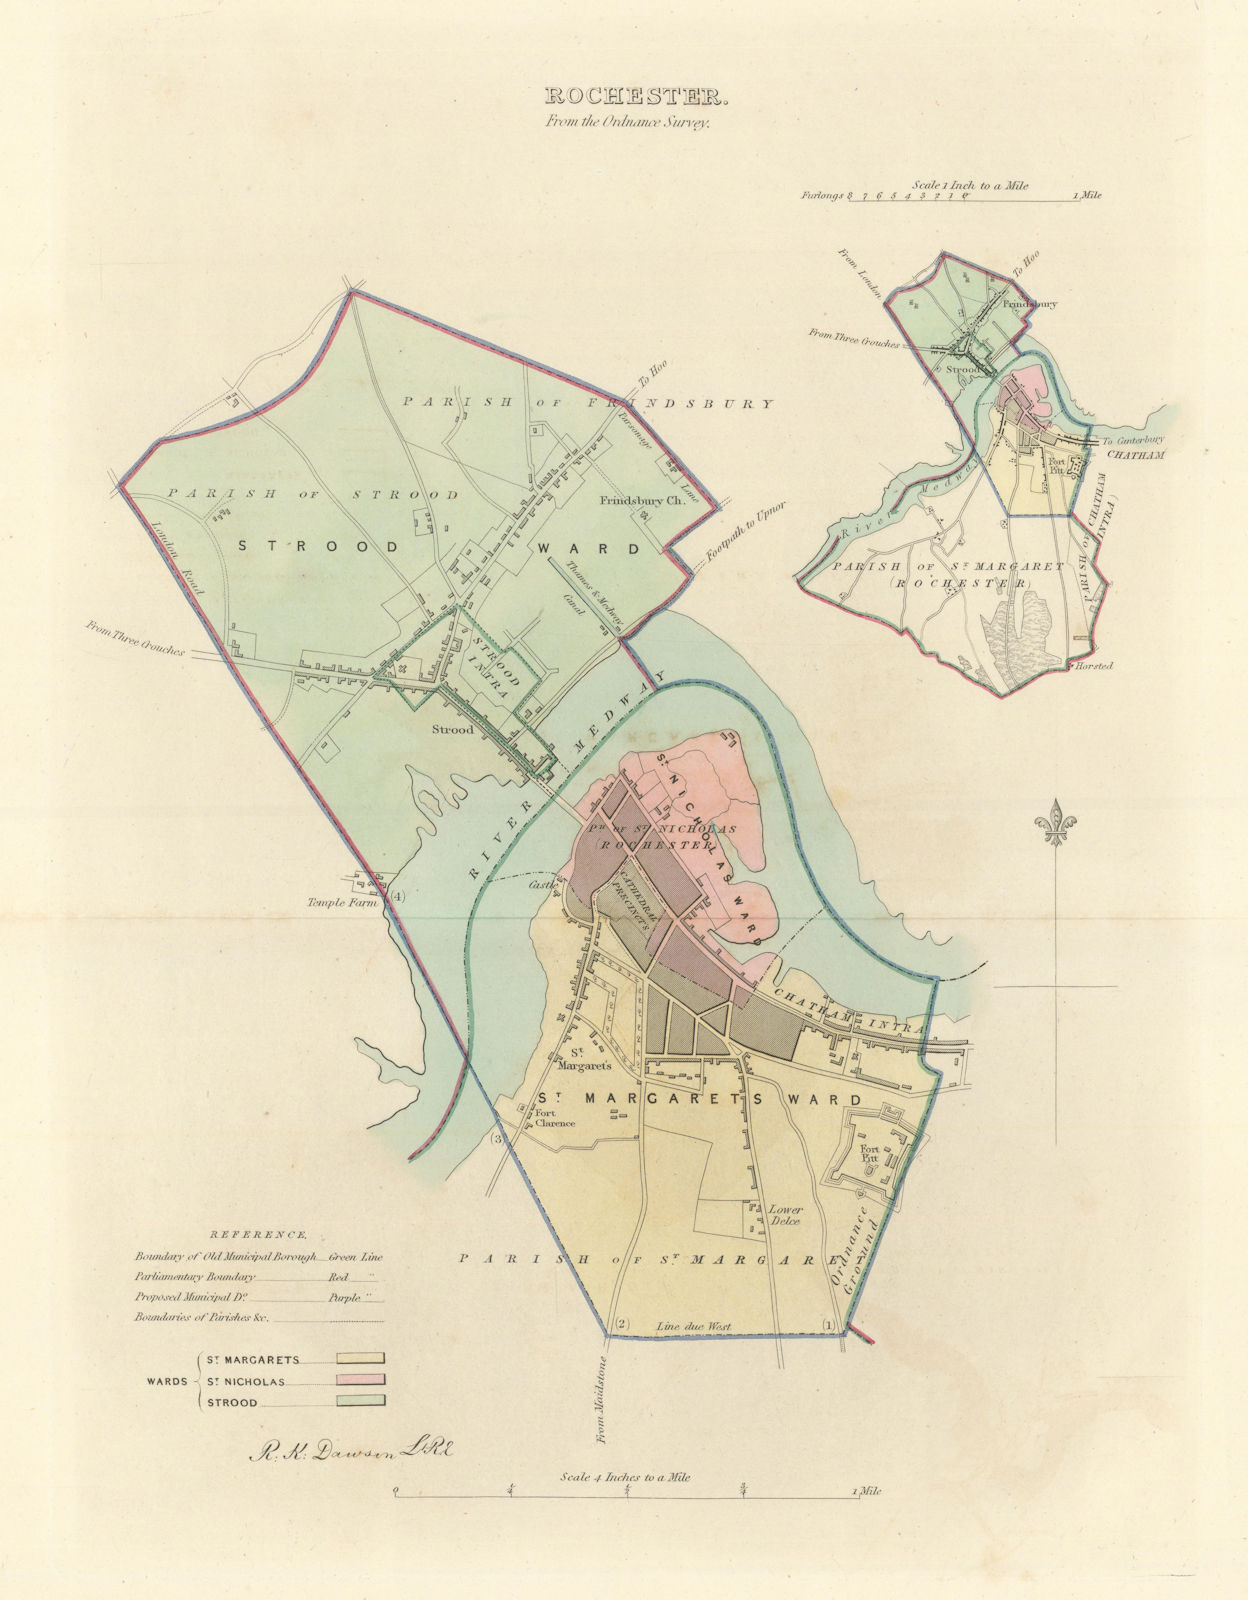 Associate Product ROCHESTER borough/town plan. BOUNDARY COMMISSION. Strood Kent. DAWSON 1837 map